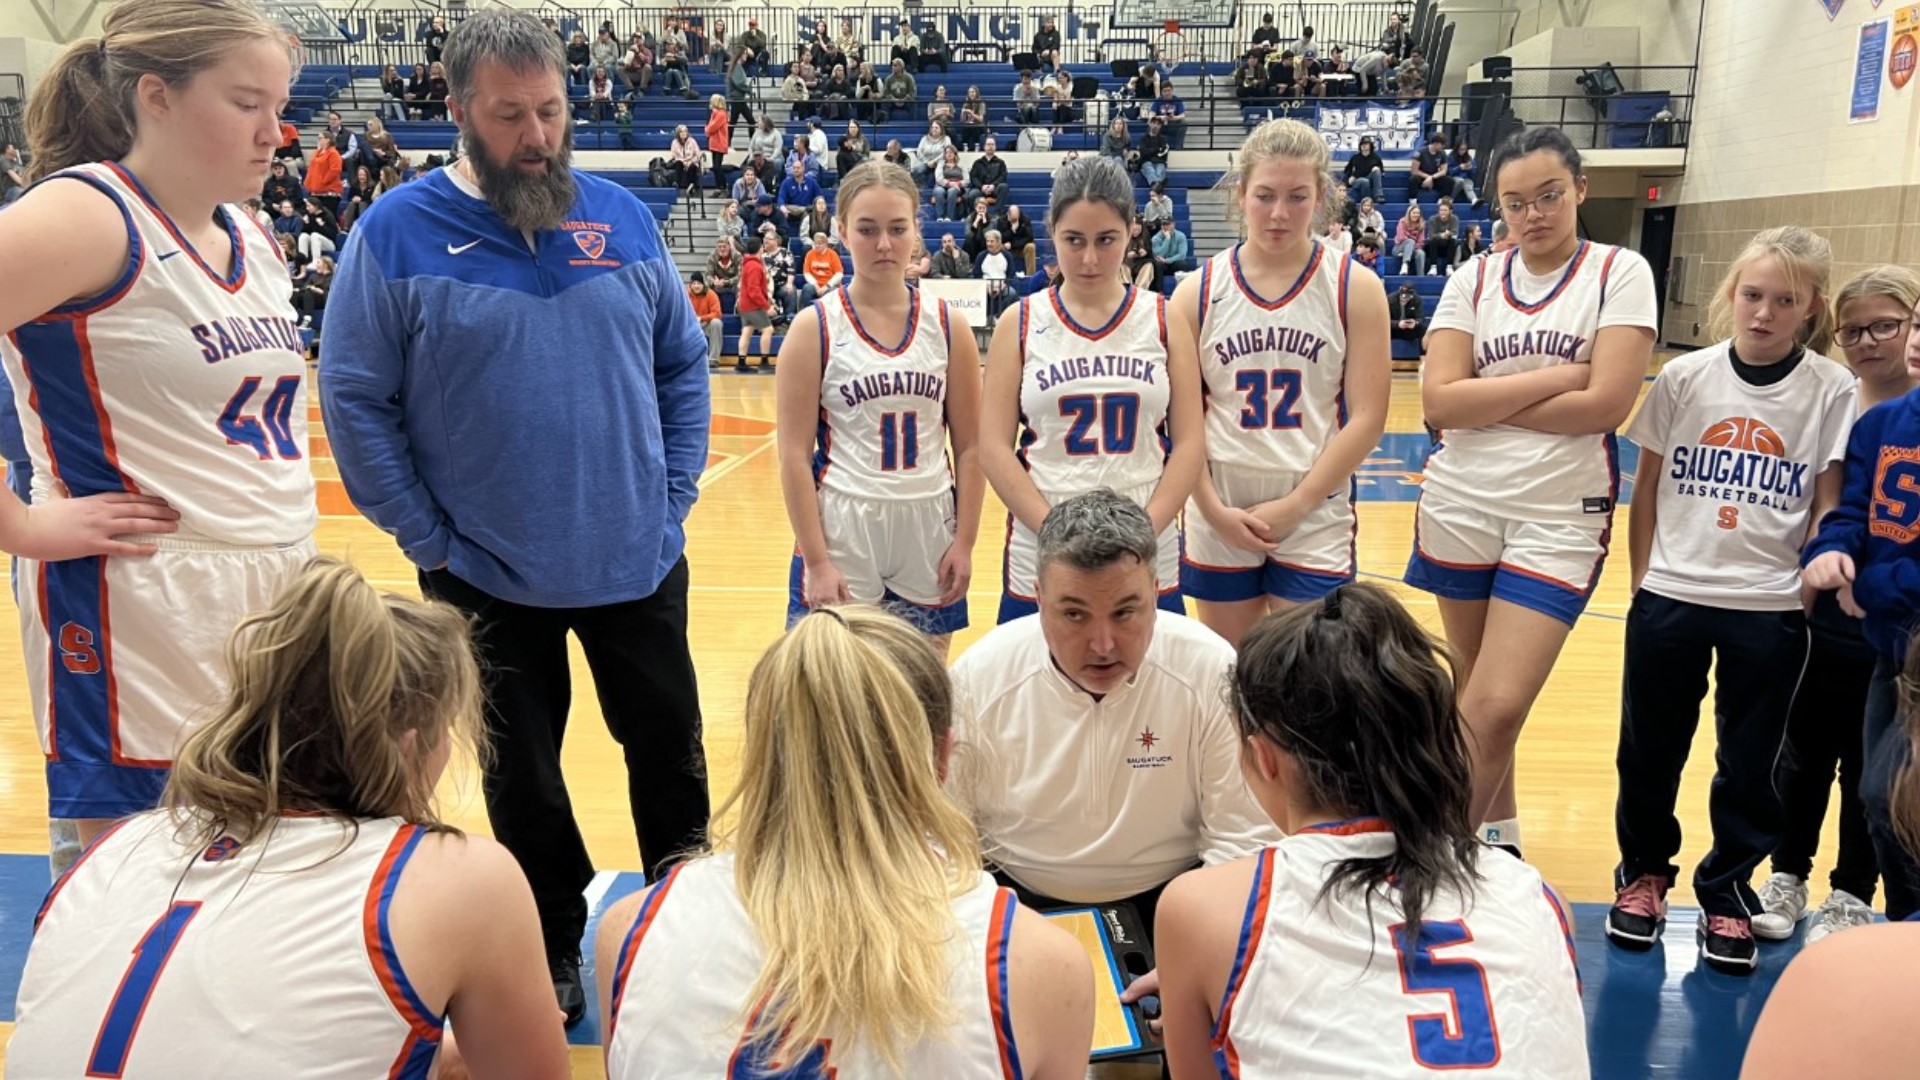 To celebrate the 50th anniversary of Title IX, the Saugatuck girls basketball team is carrying on the stories of Michigan women who were trailblazers in sports.